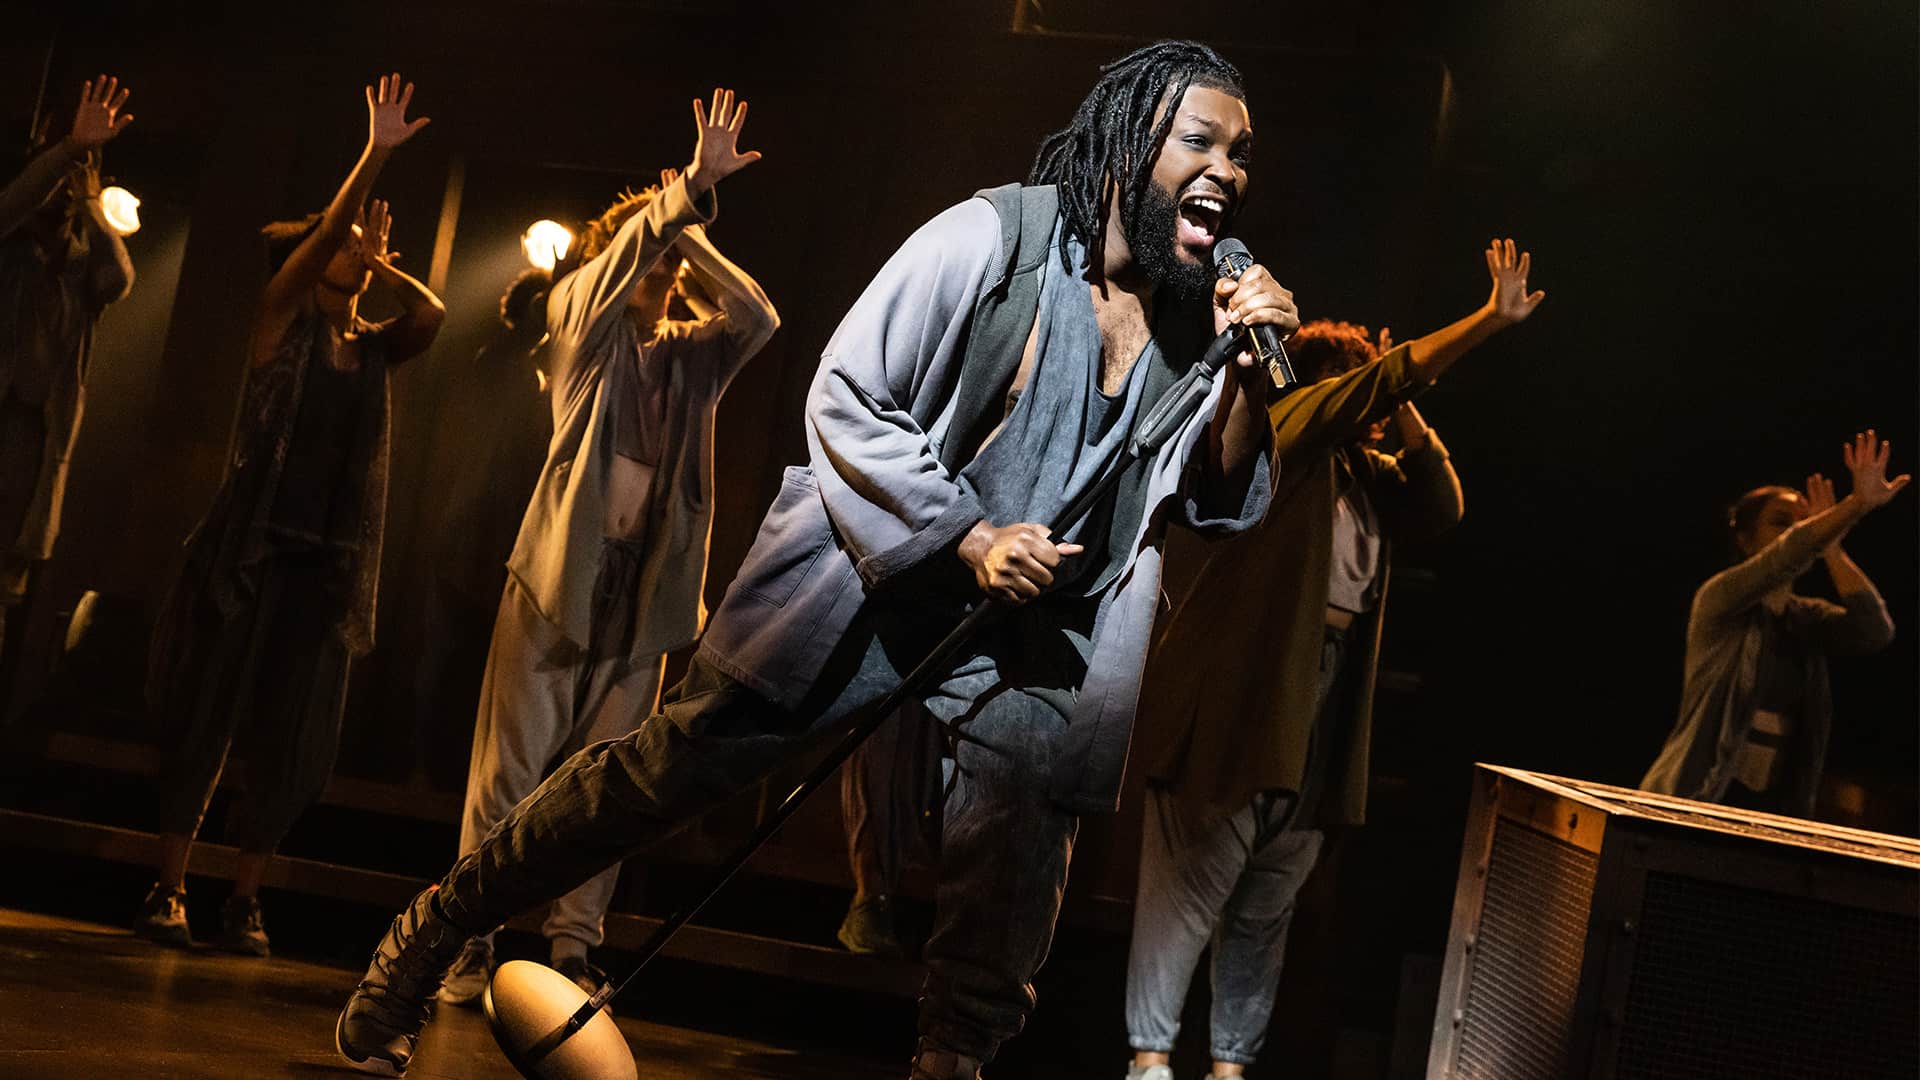 Elvie Ellis and the company of the North American Tour of Jesus Christ Superstar. Photo by Evan Zimmerman for MurphyMade